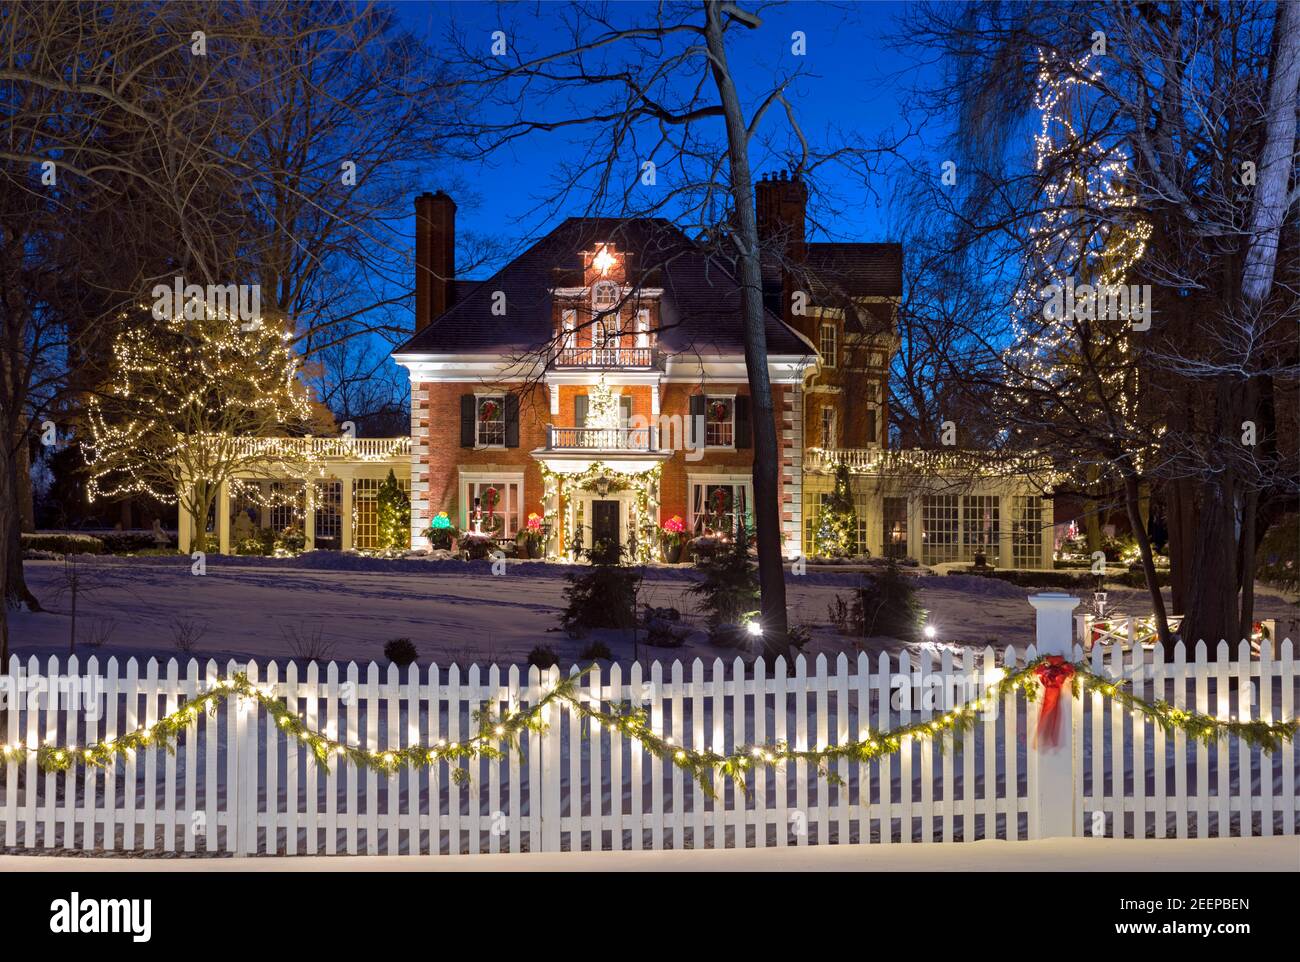 An historic 1840's brick house decorated for Christmas in a snowy winter setting, white picket fence and christmas lights at dusk Stock Photo